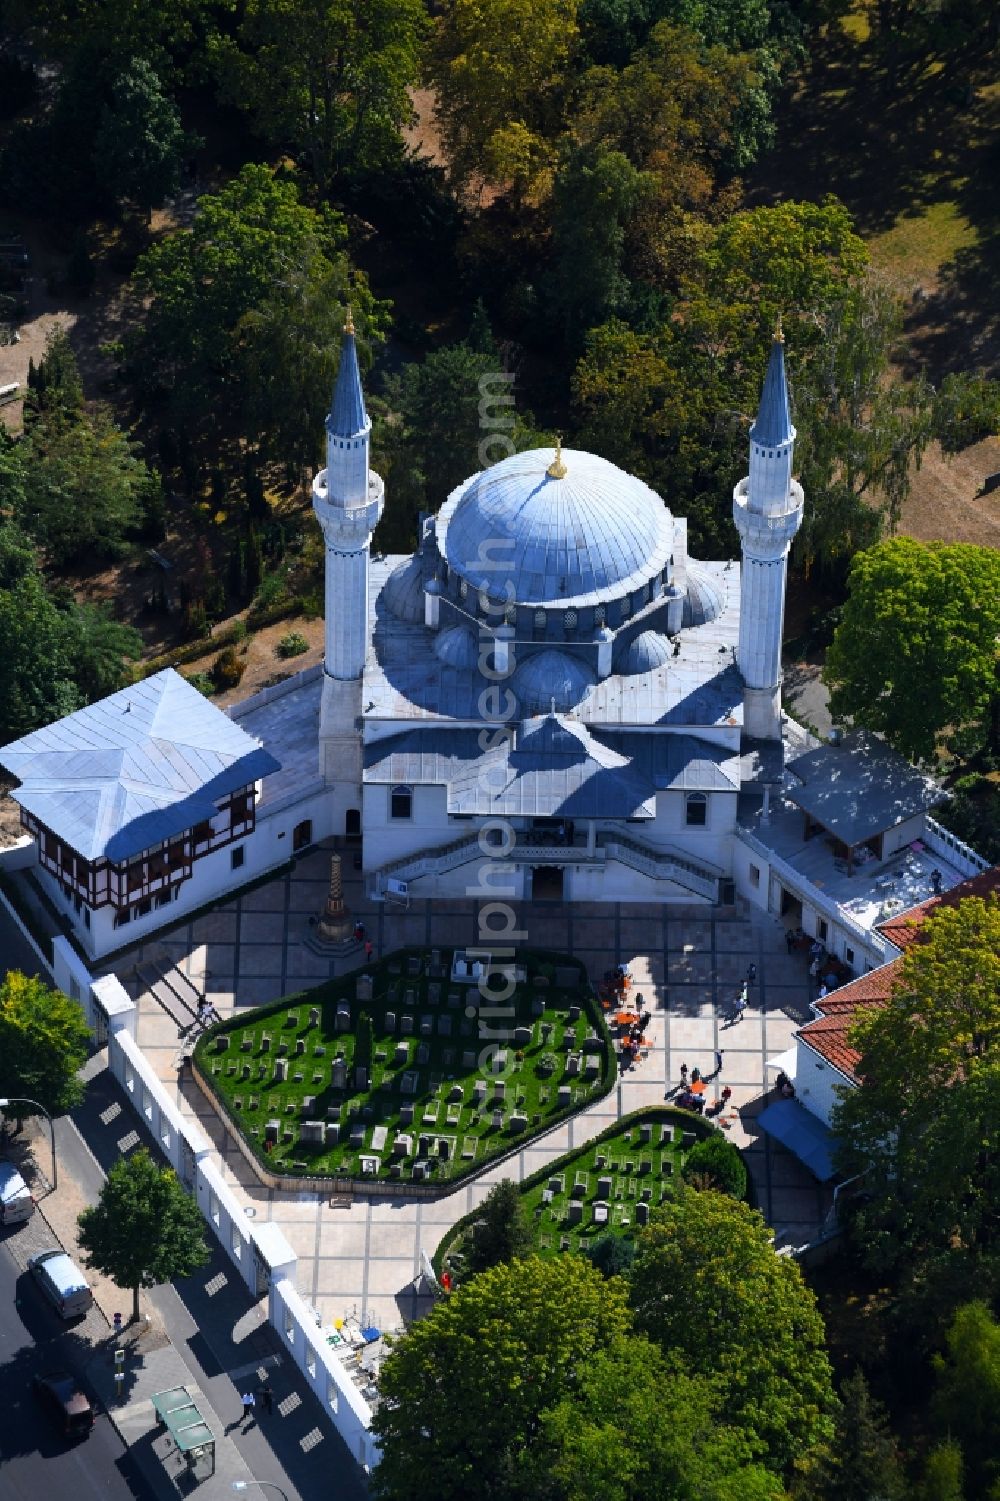 Berlin from above - Building of the mosque Sehitlik Conii on Columbiadonm in the district Neukoelln in Berlin, Germany